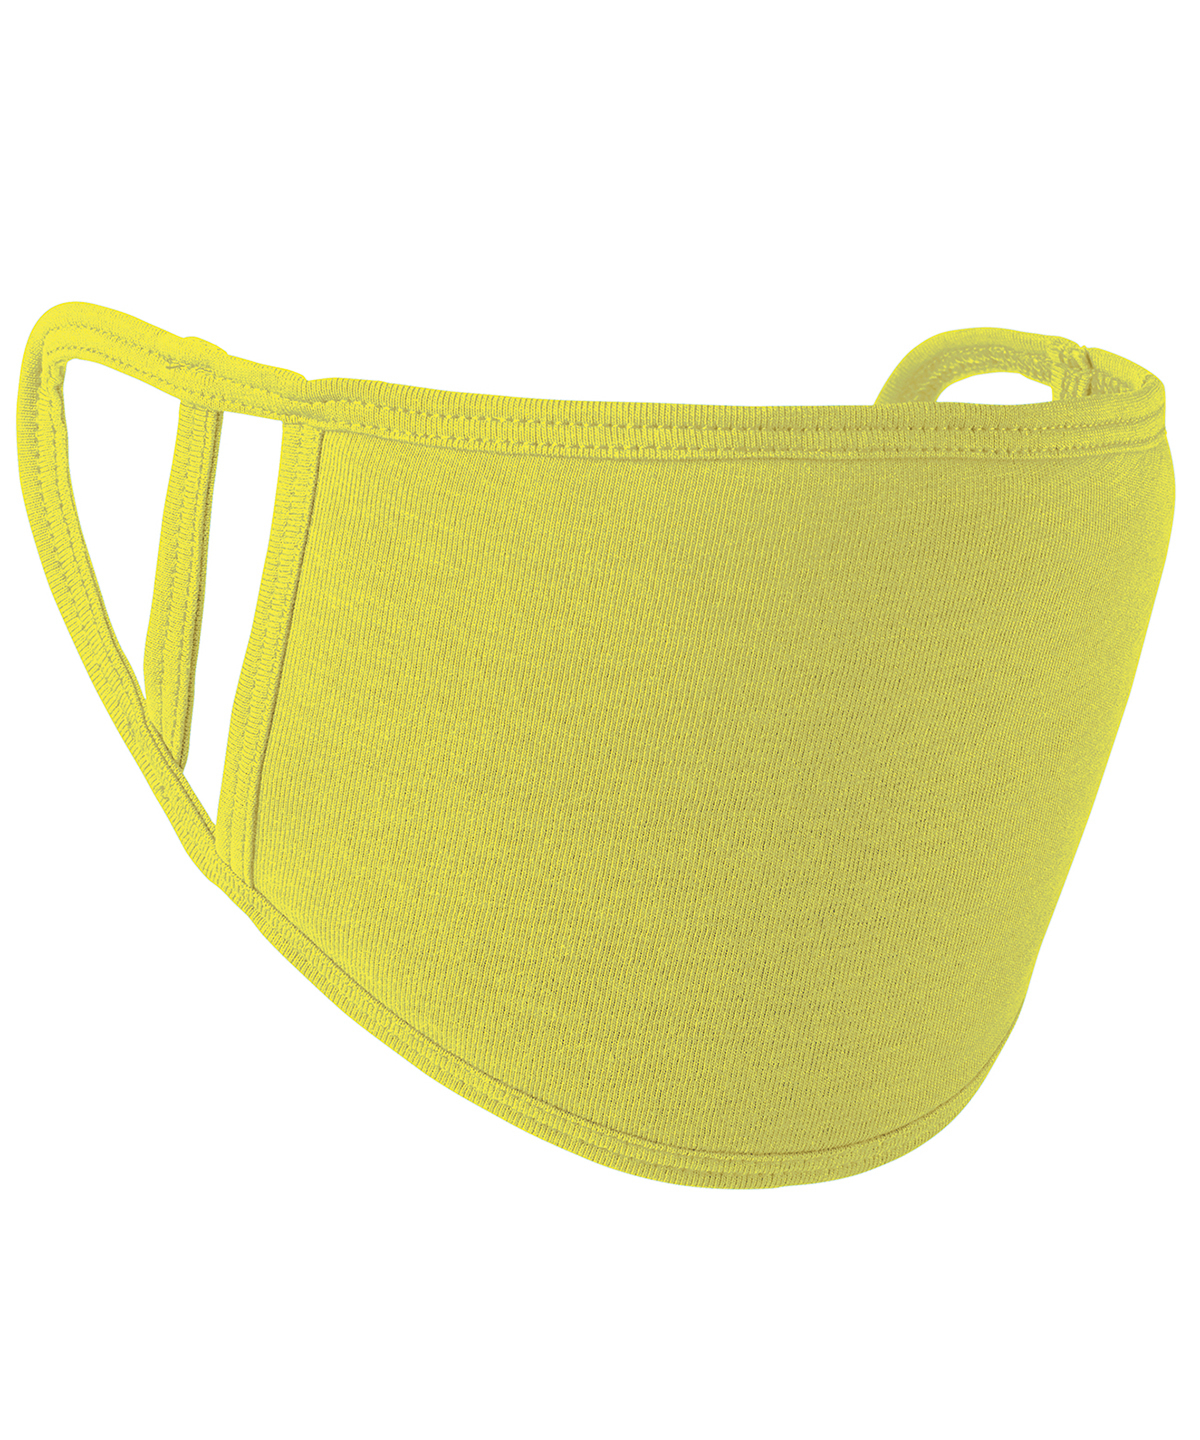 Washable 2-ply Face Covering in lime